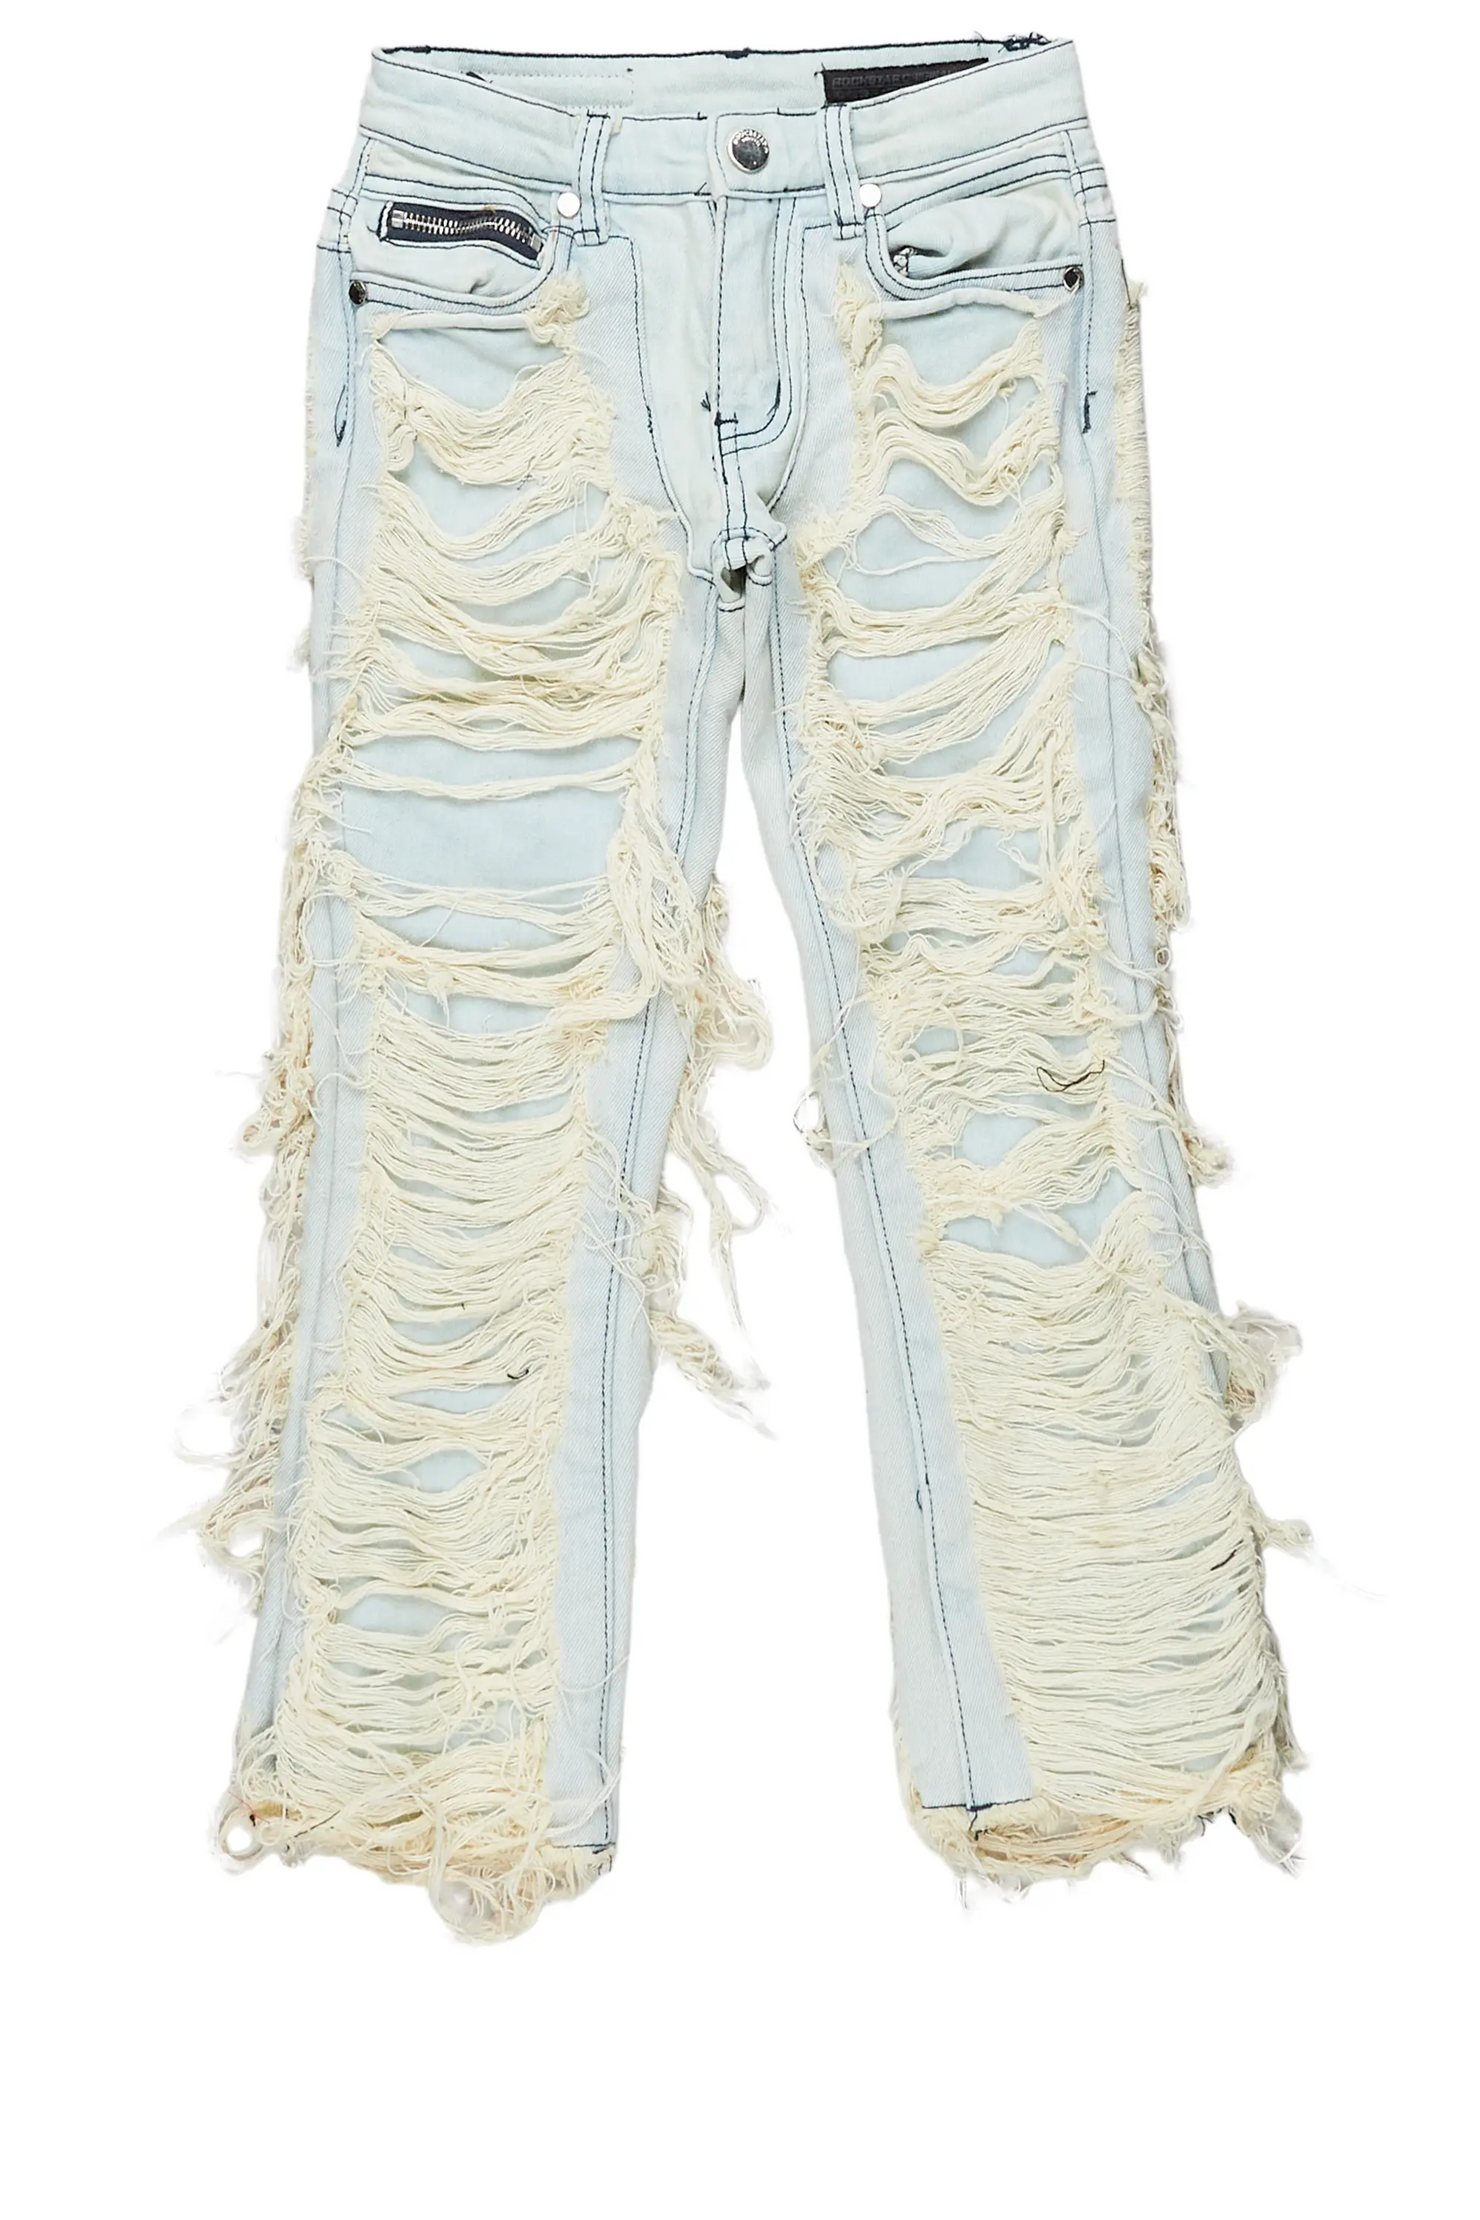 Girls Concetta Light Blue Stacked Flare Jean